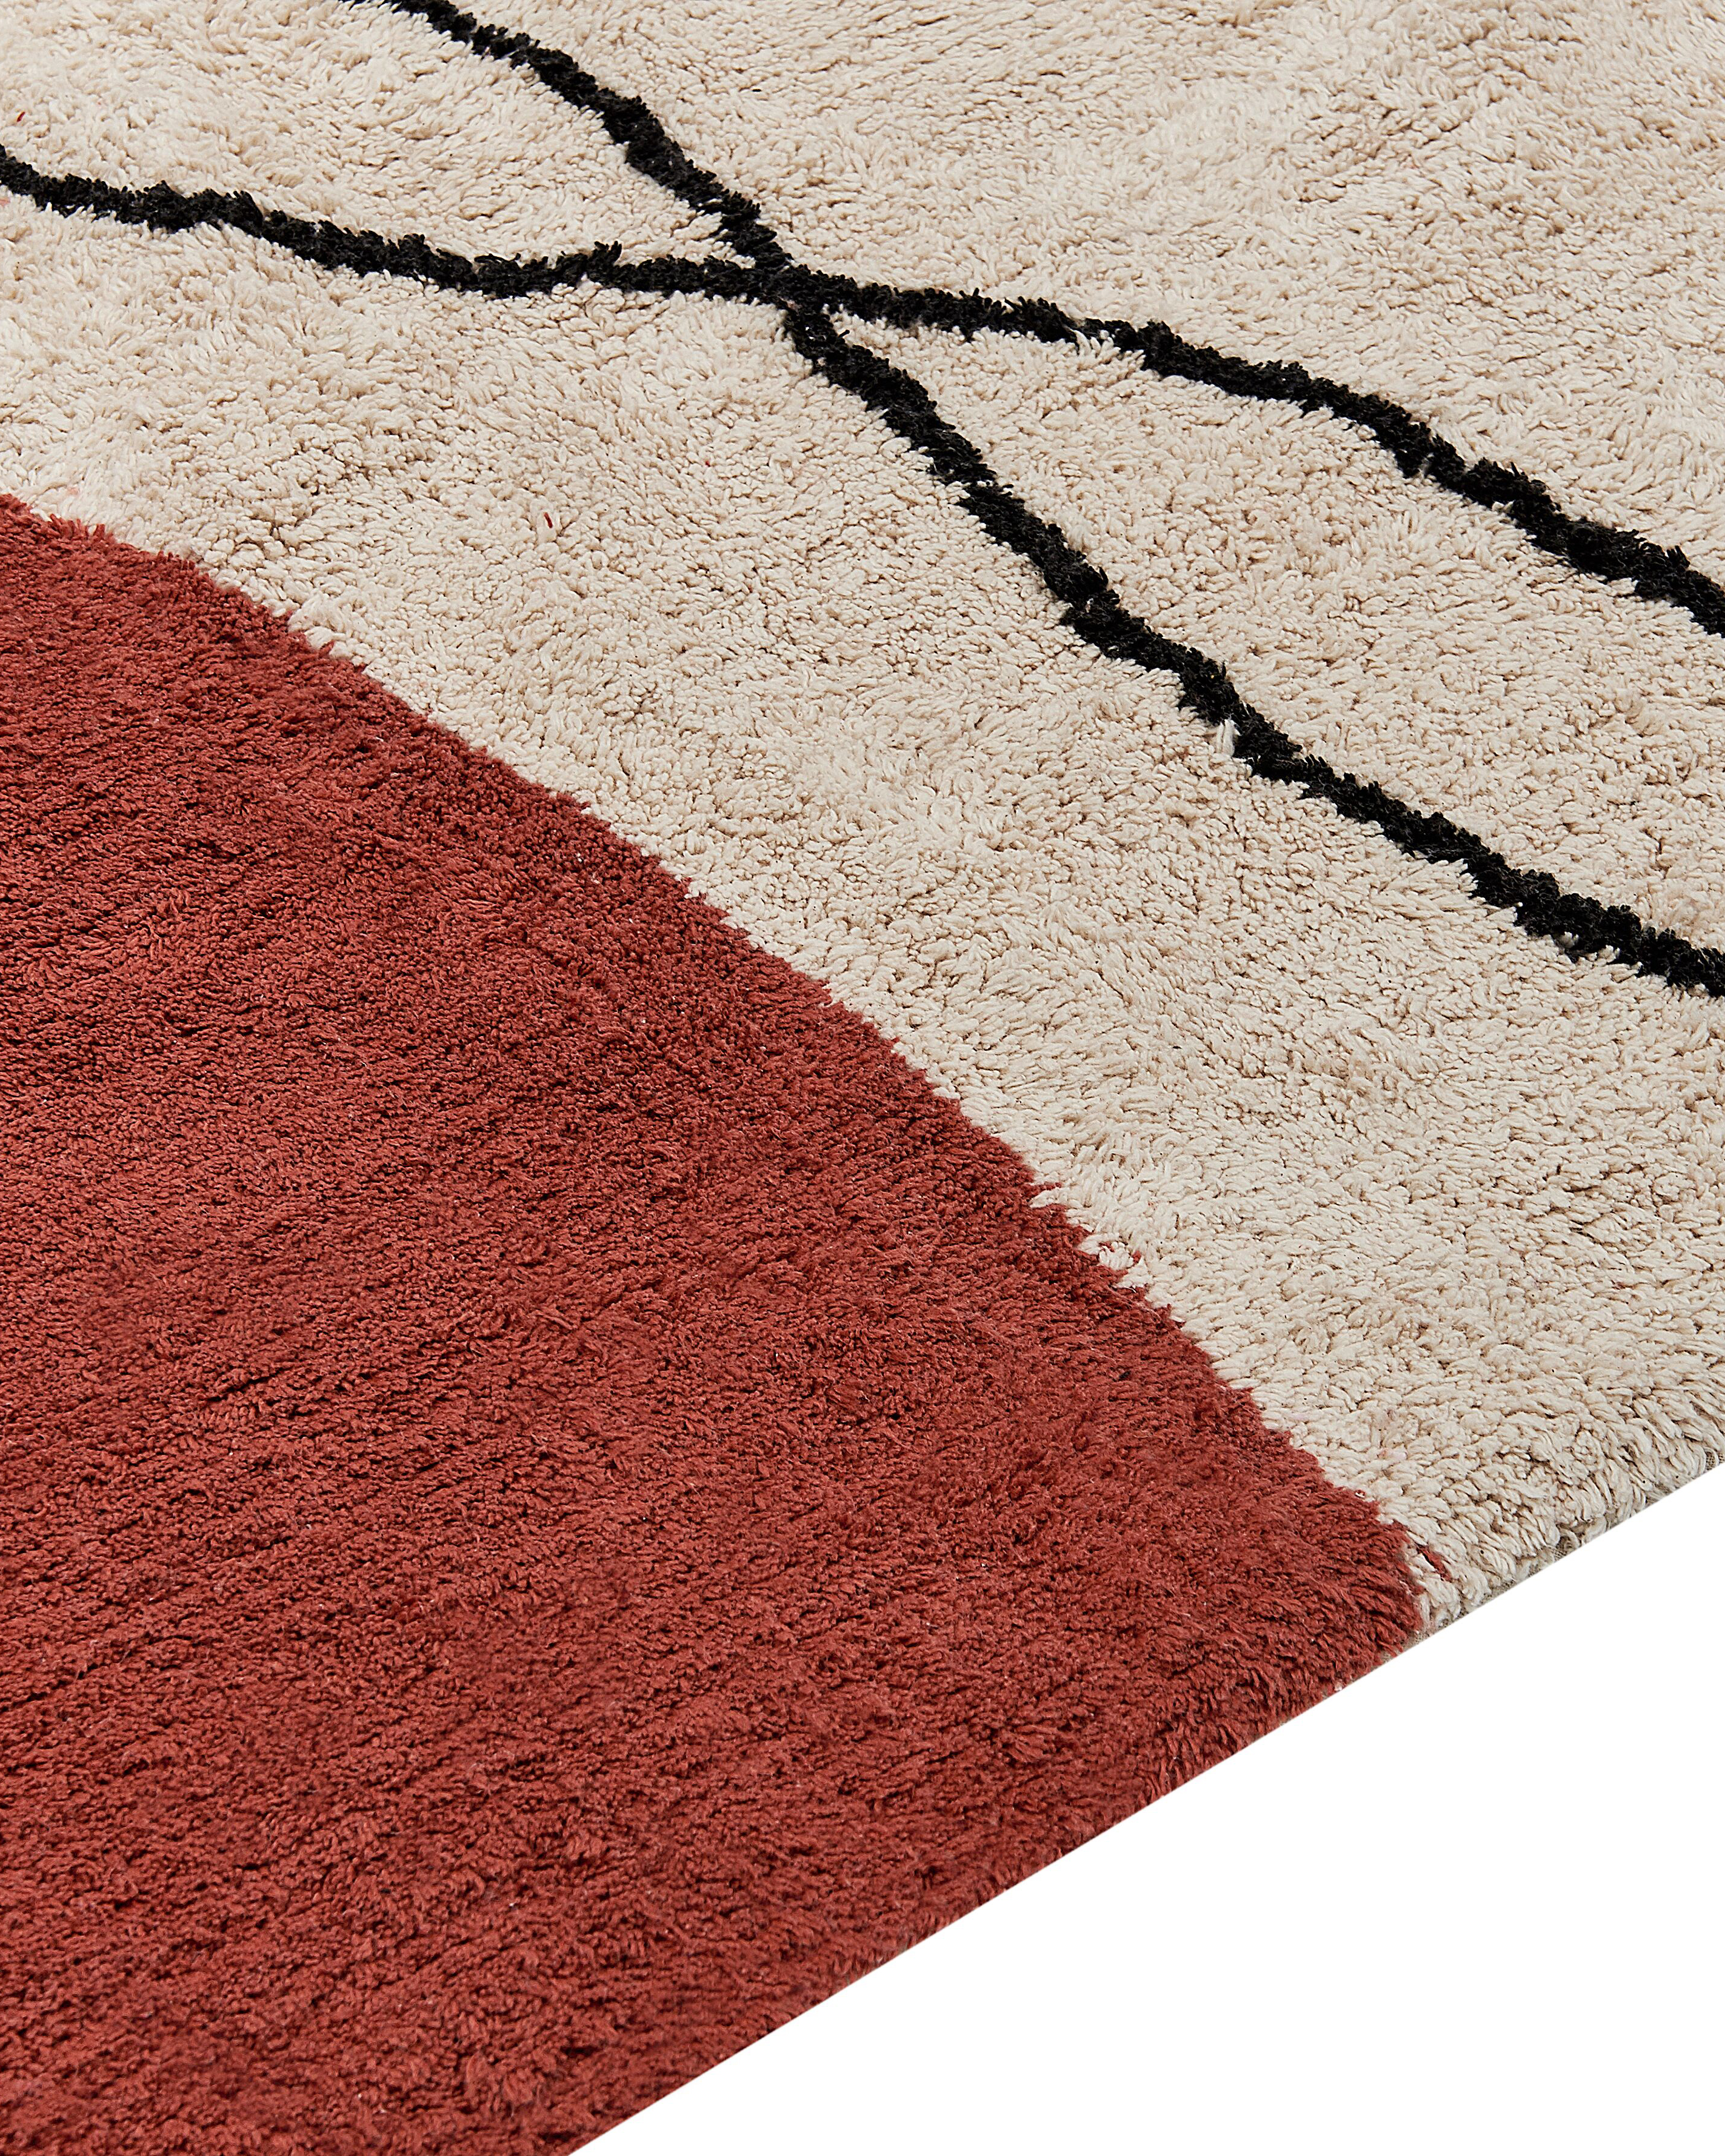 Cotton Area Rug 160 x 230 cm Beige and Red BOLAT_840008